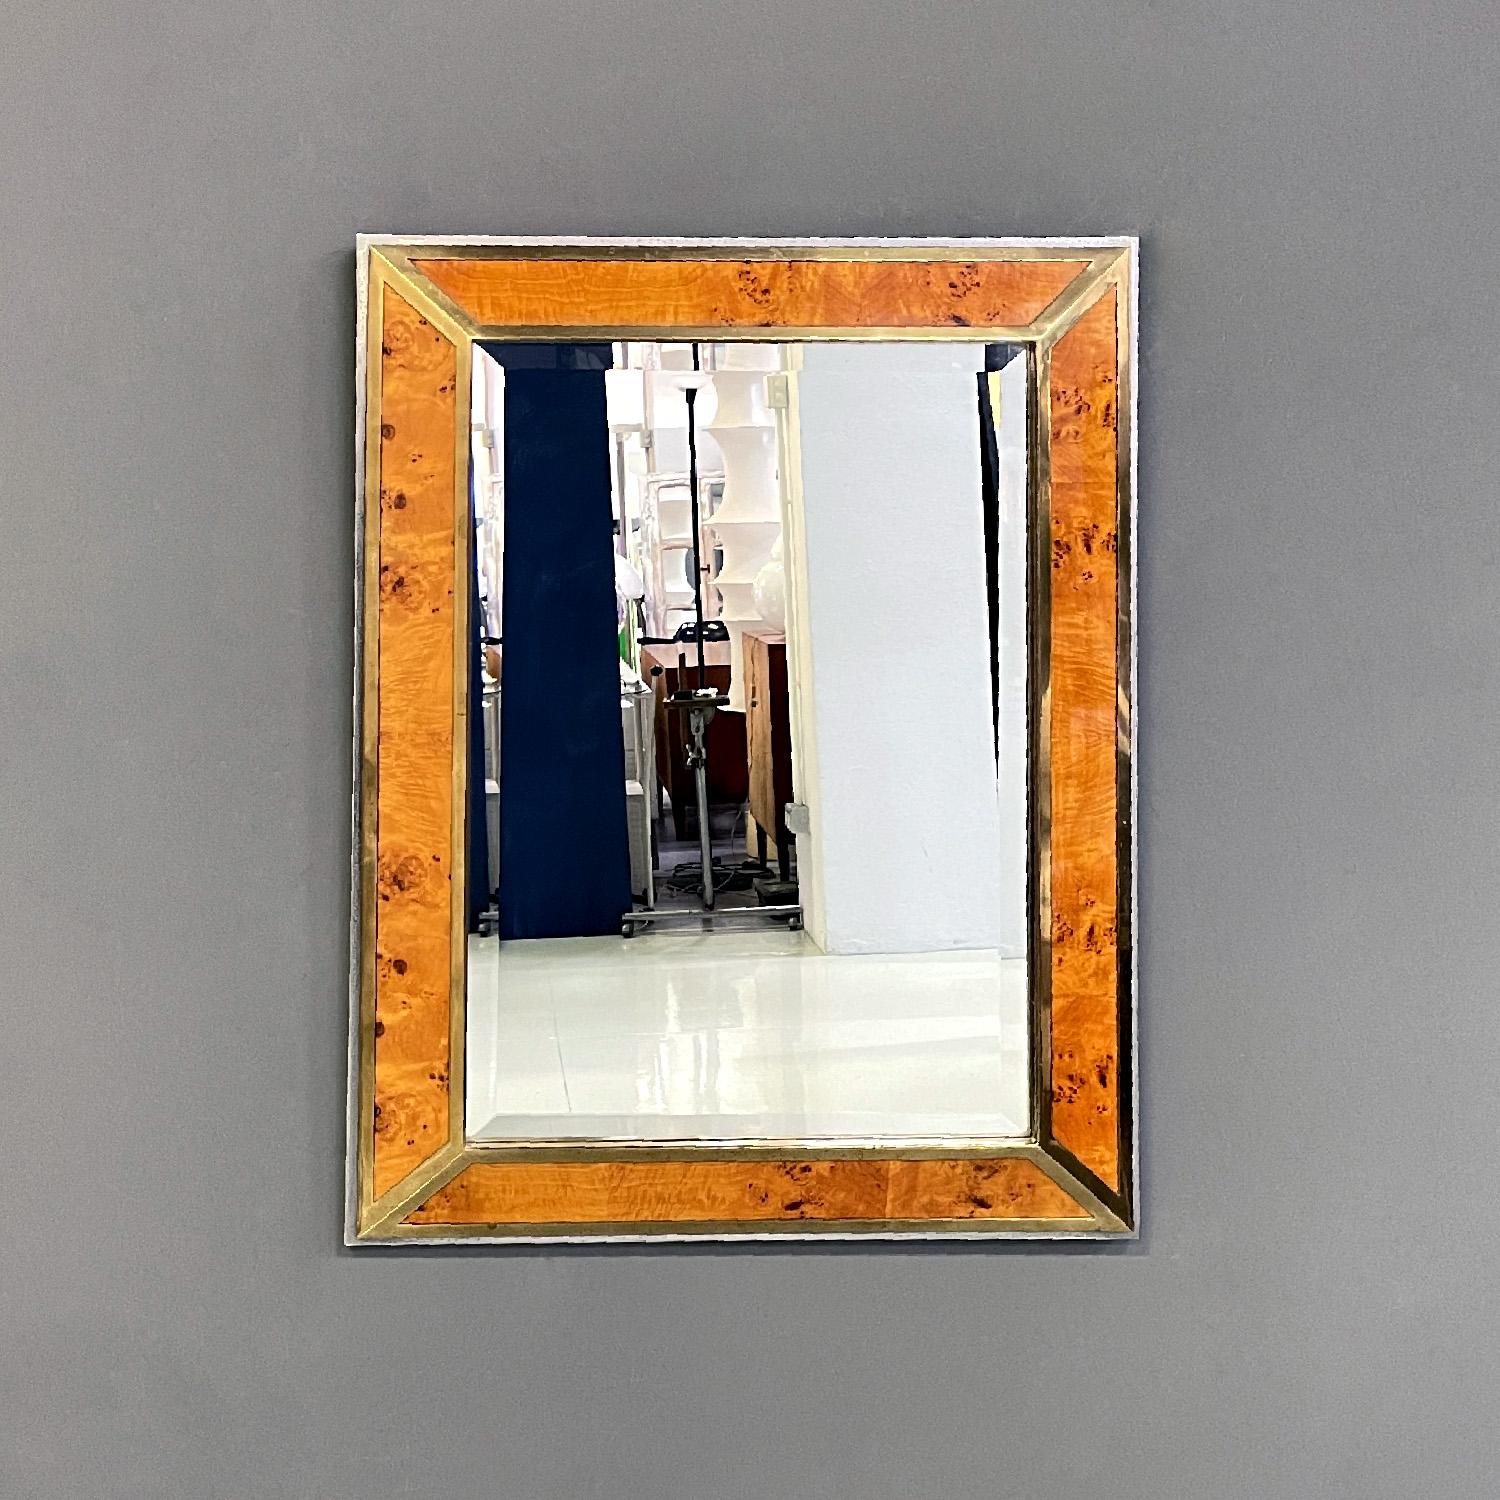 Italian modern briar root brass and chromed metal wall mirror by D.I.D., 1980s
Rectangular wall mirror. The frame is made up of four parts of briar with brass profiles that rest on a raised chromed metal base.
Produced by D.I.D. Dada Industries